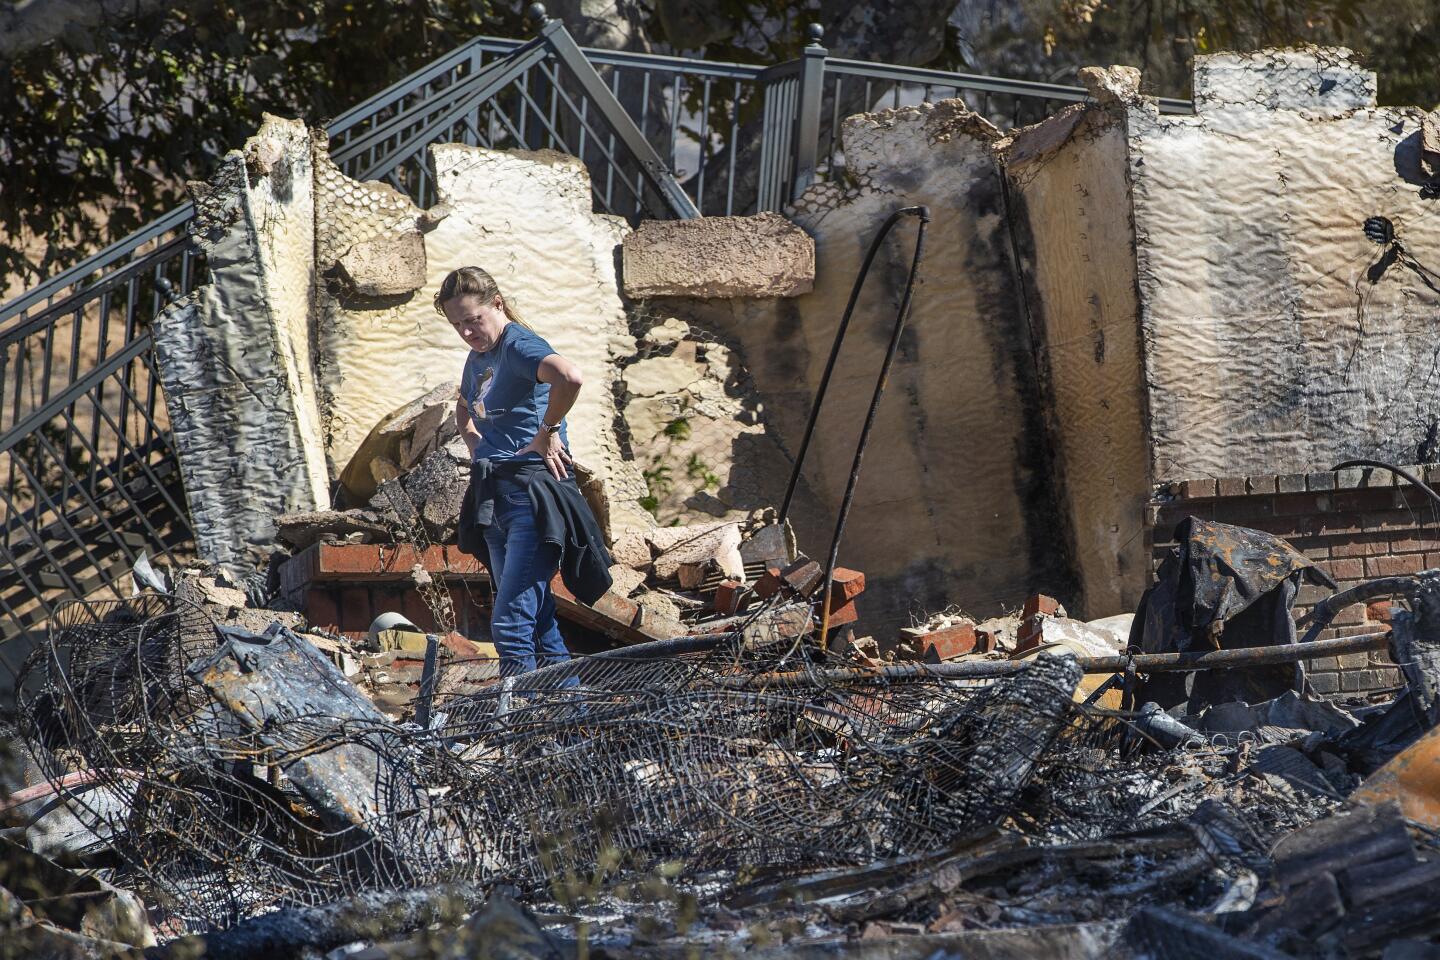 A family member views the destruction of a home that was destroyed in the Hillside fire in San Bernardino.